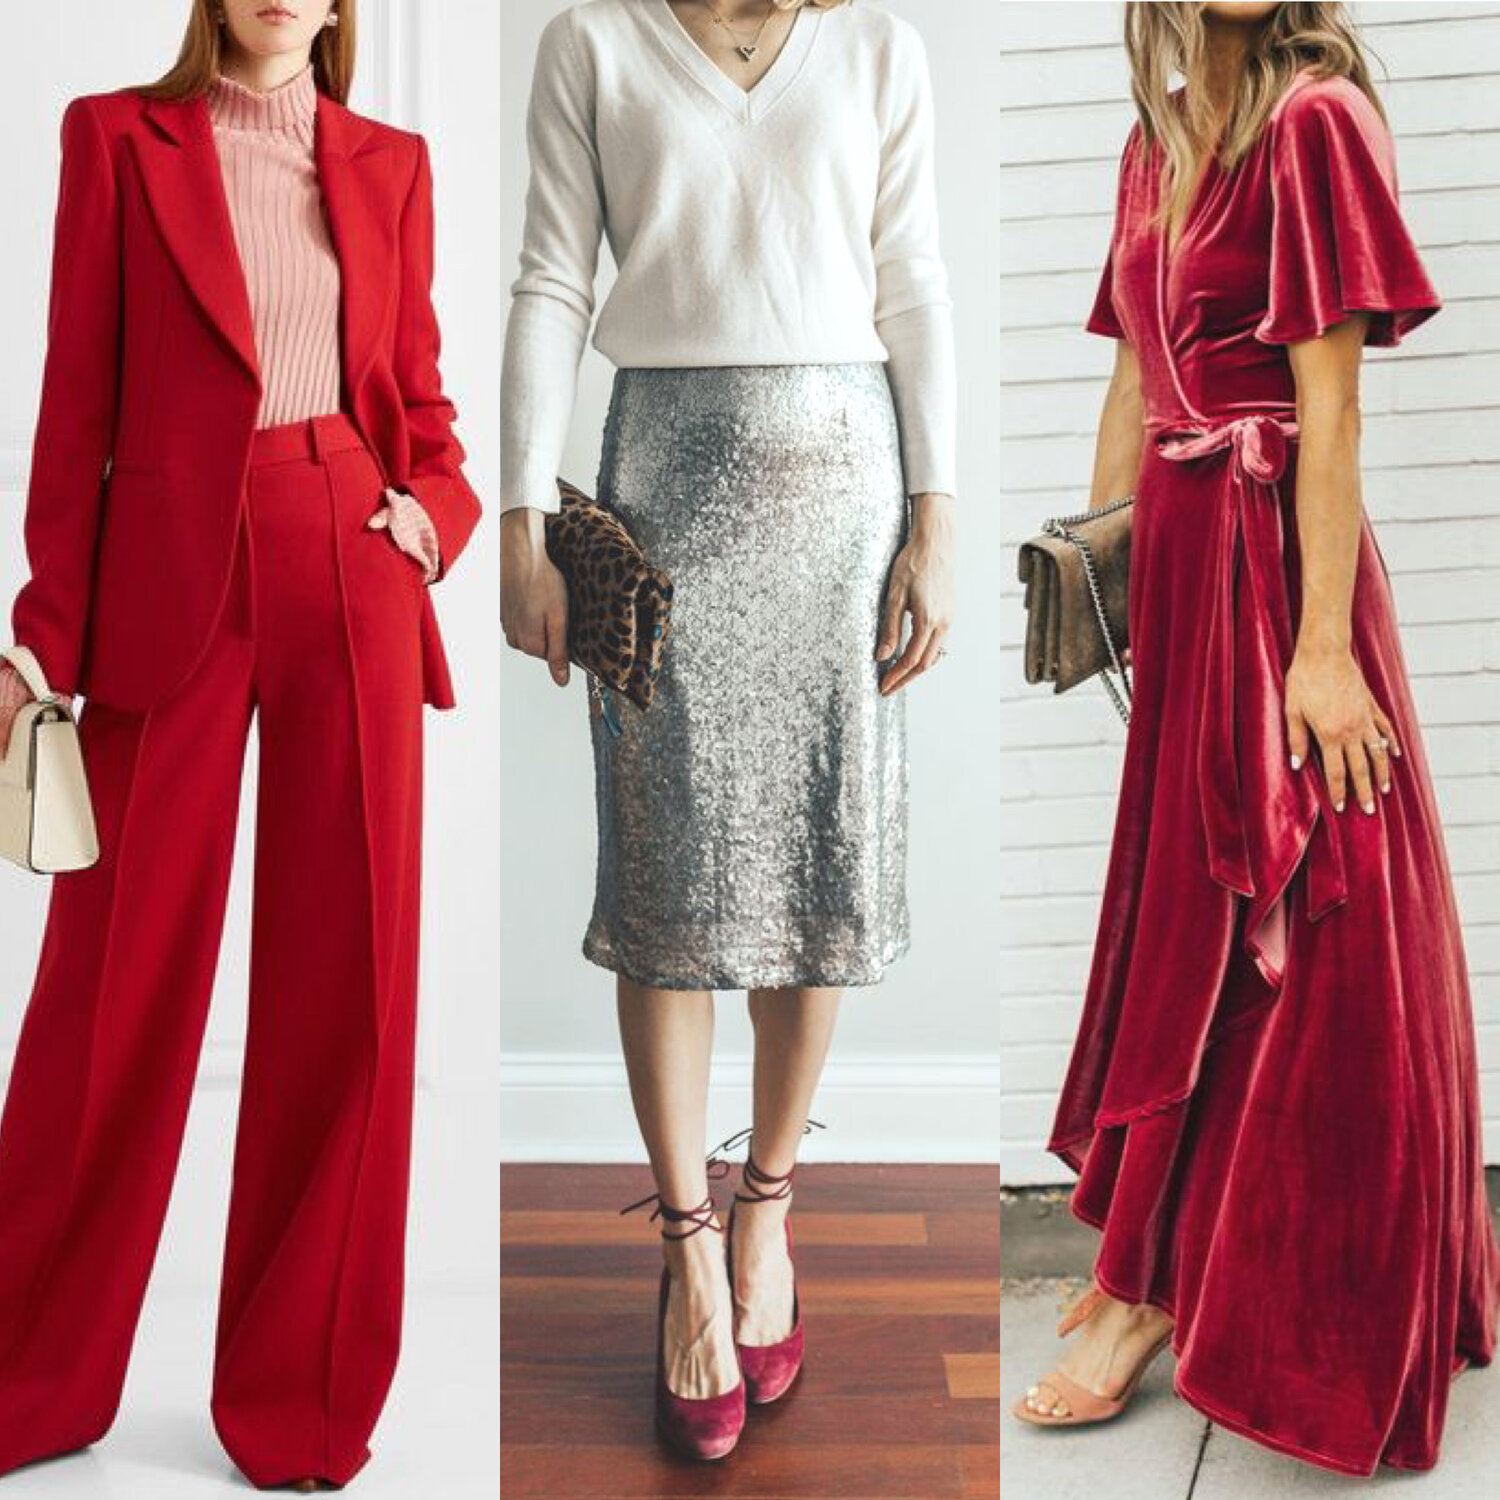 How to Style the Perfect Holiday Outfit